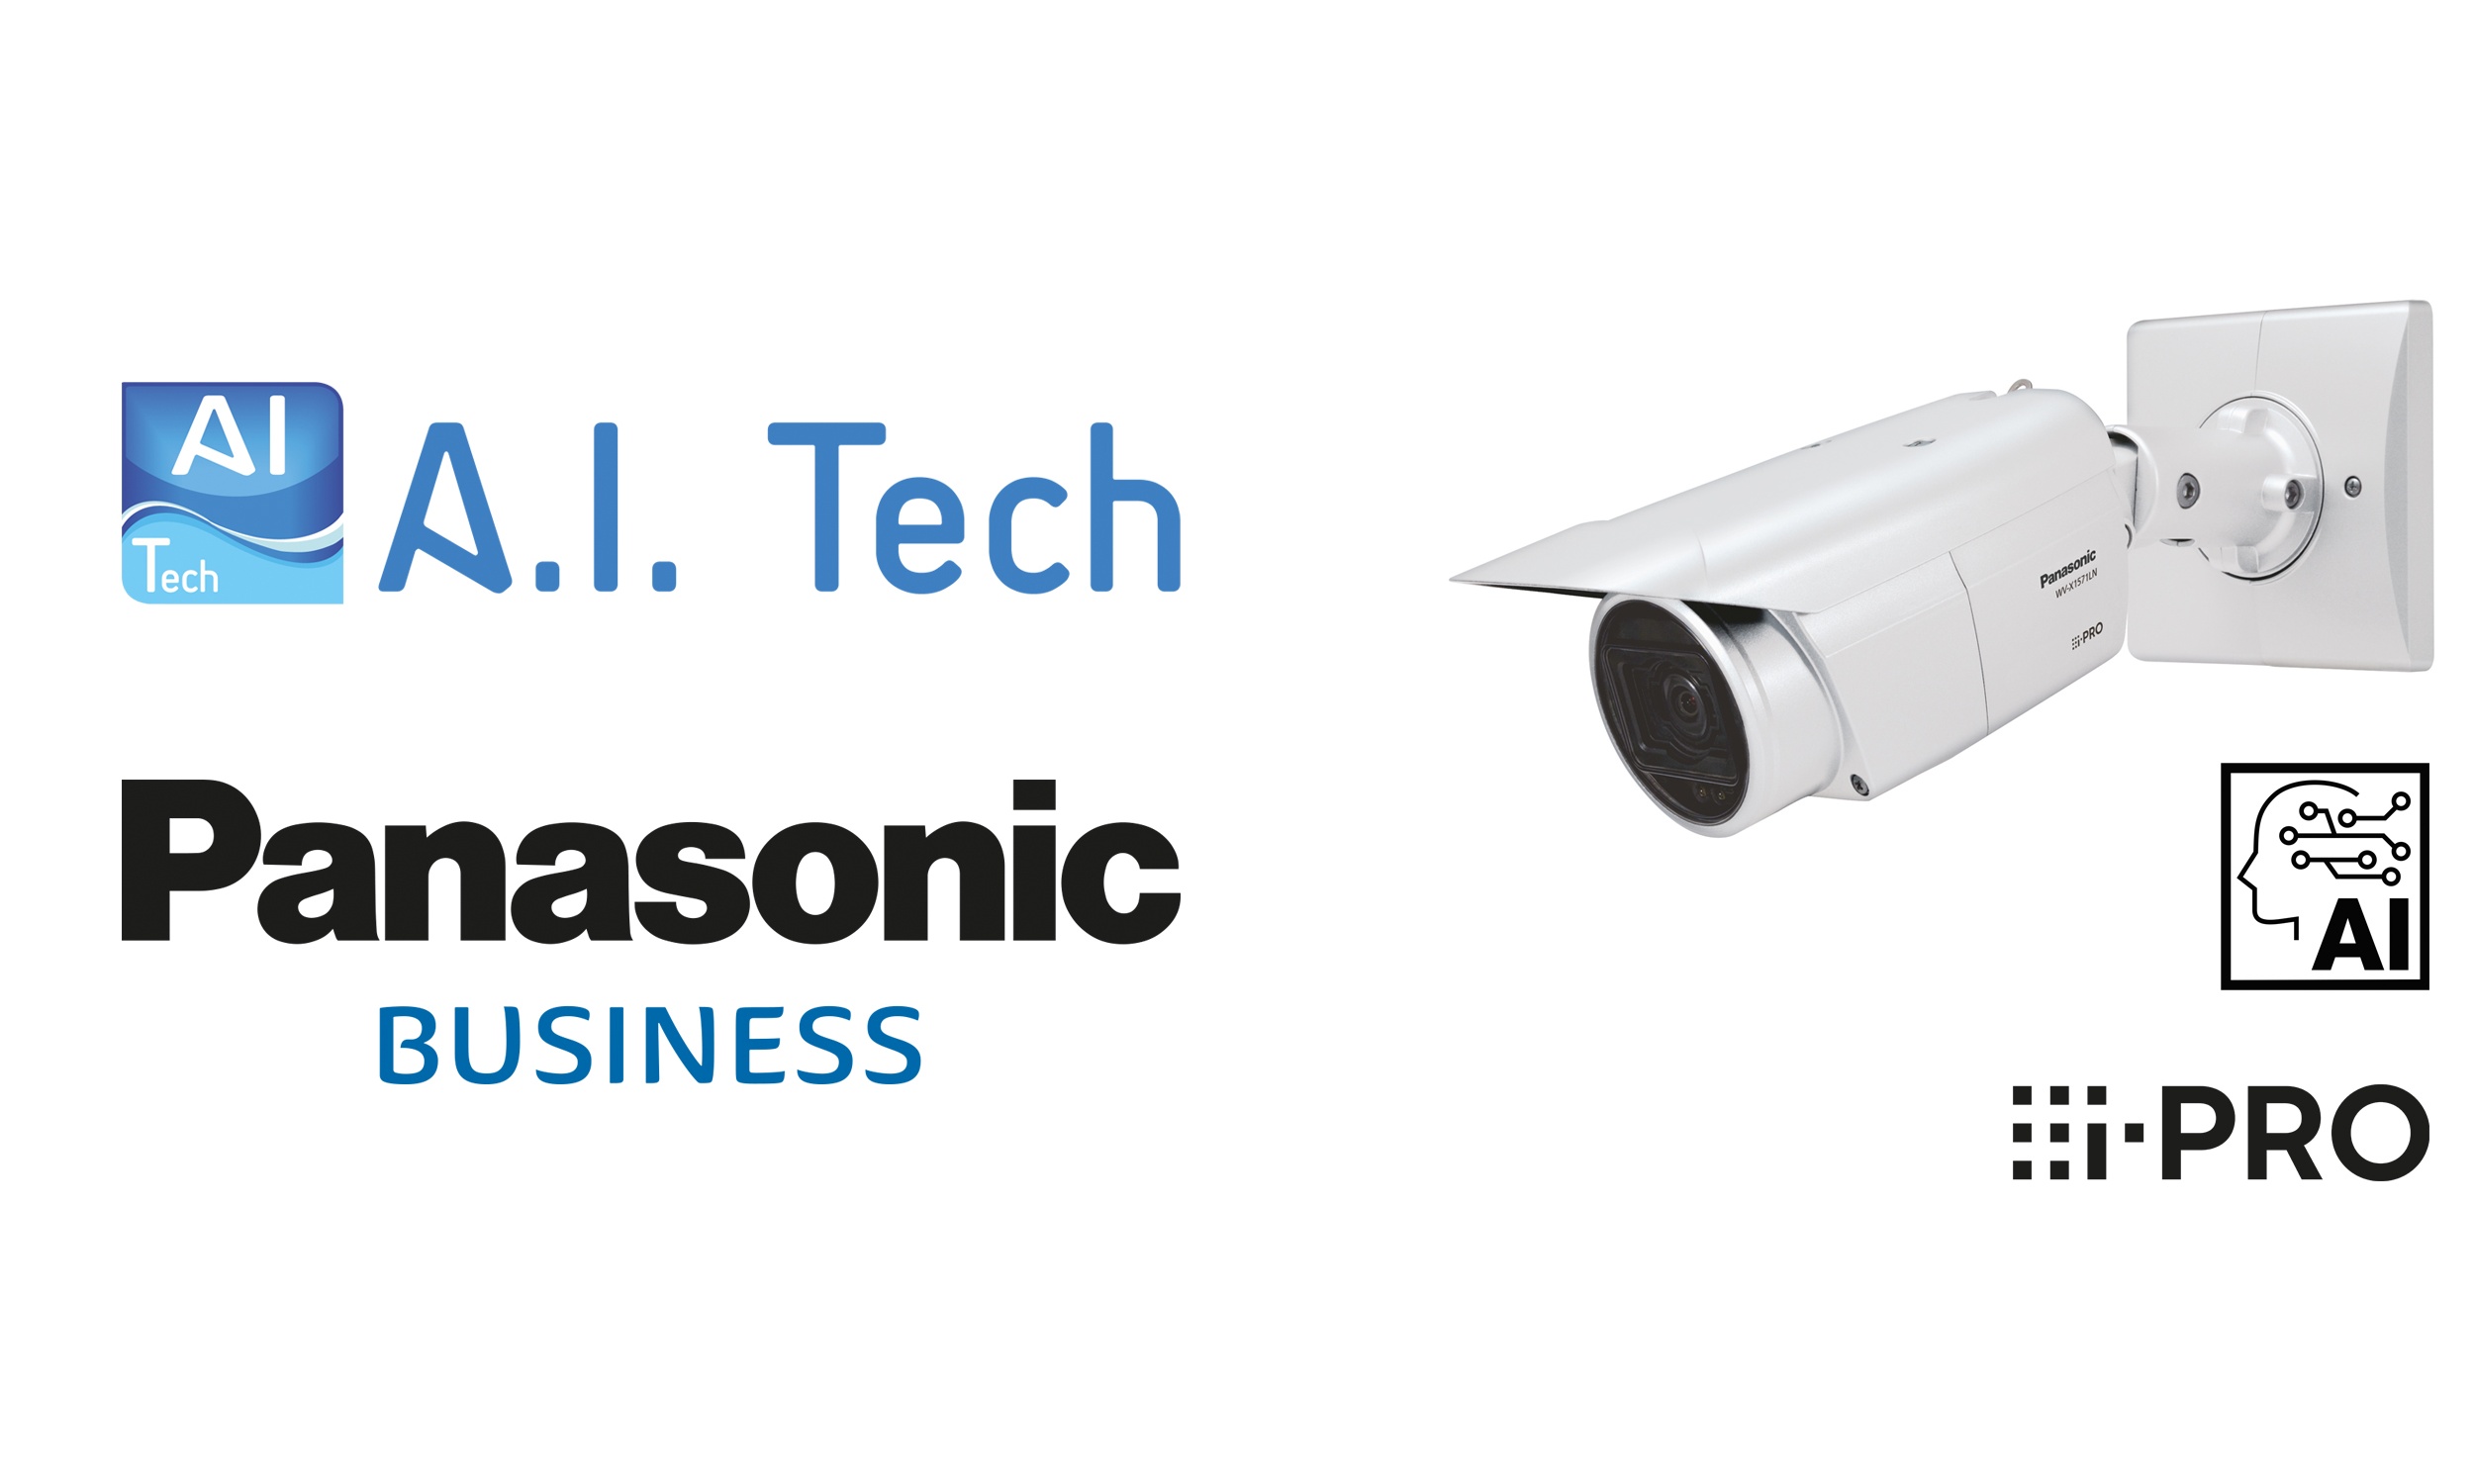 Panasonic Security partners with A.I.Tech for AI-based security applications